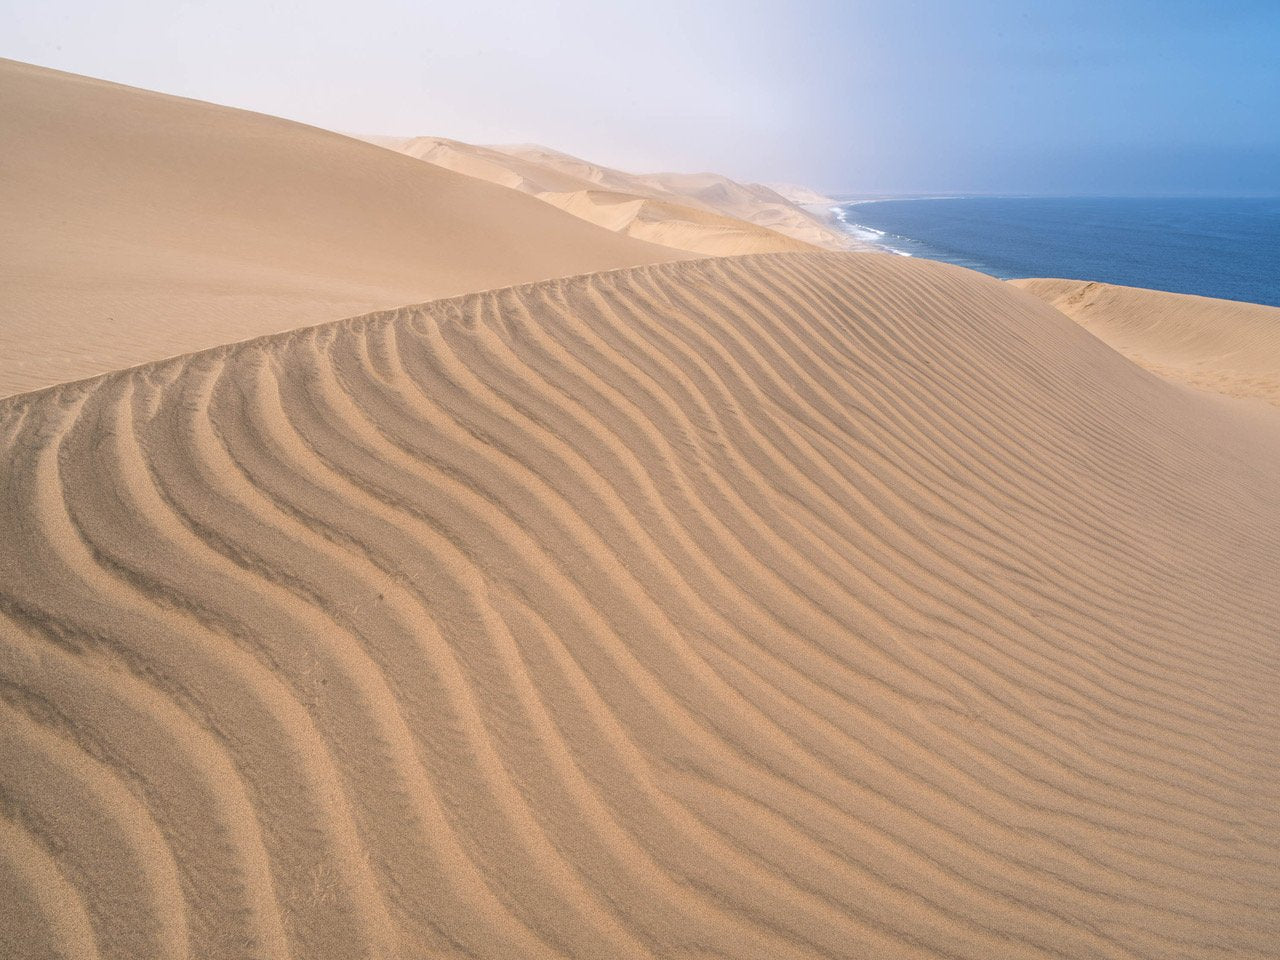 Desert with sand waves, Namibia #9, Africa